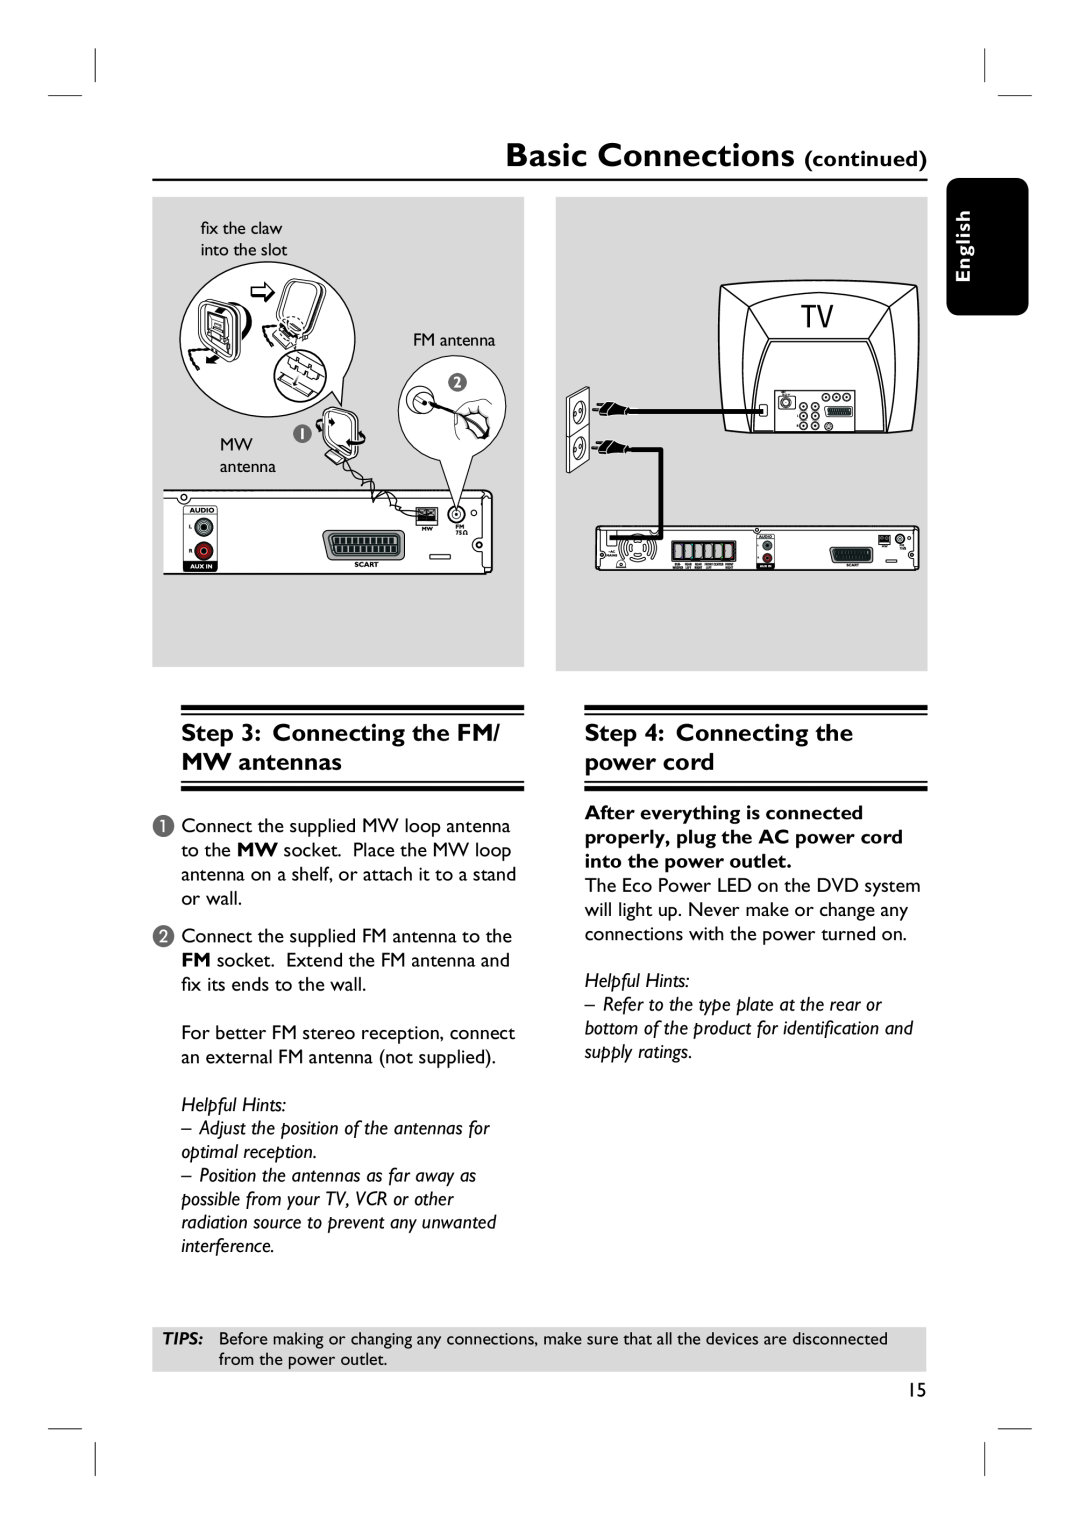 Philips HTS3100 user manual Connecting the FM/ MW antennas, Connecting the power cord, Basic Connections continued, English 